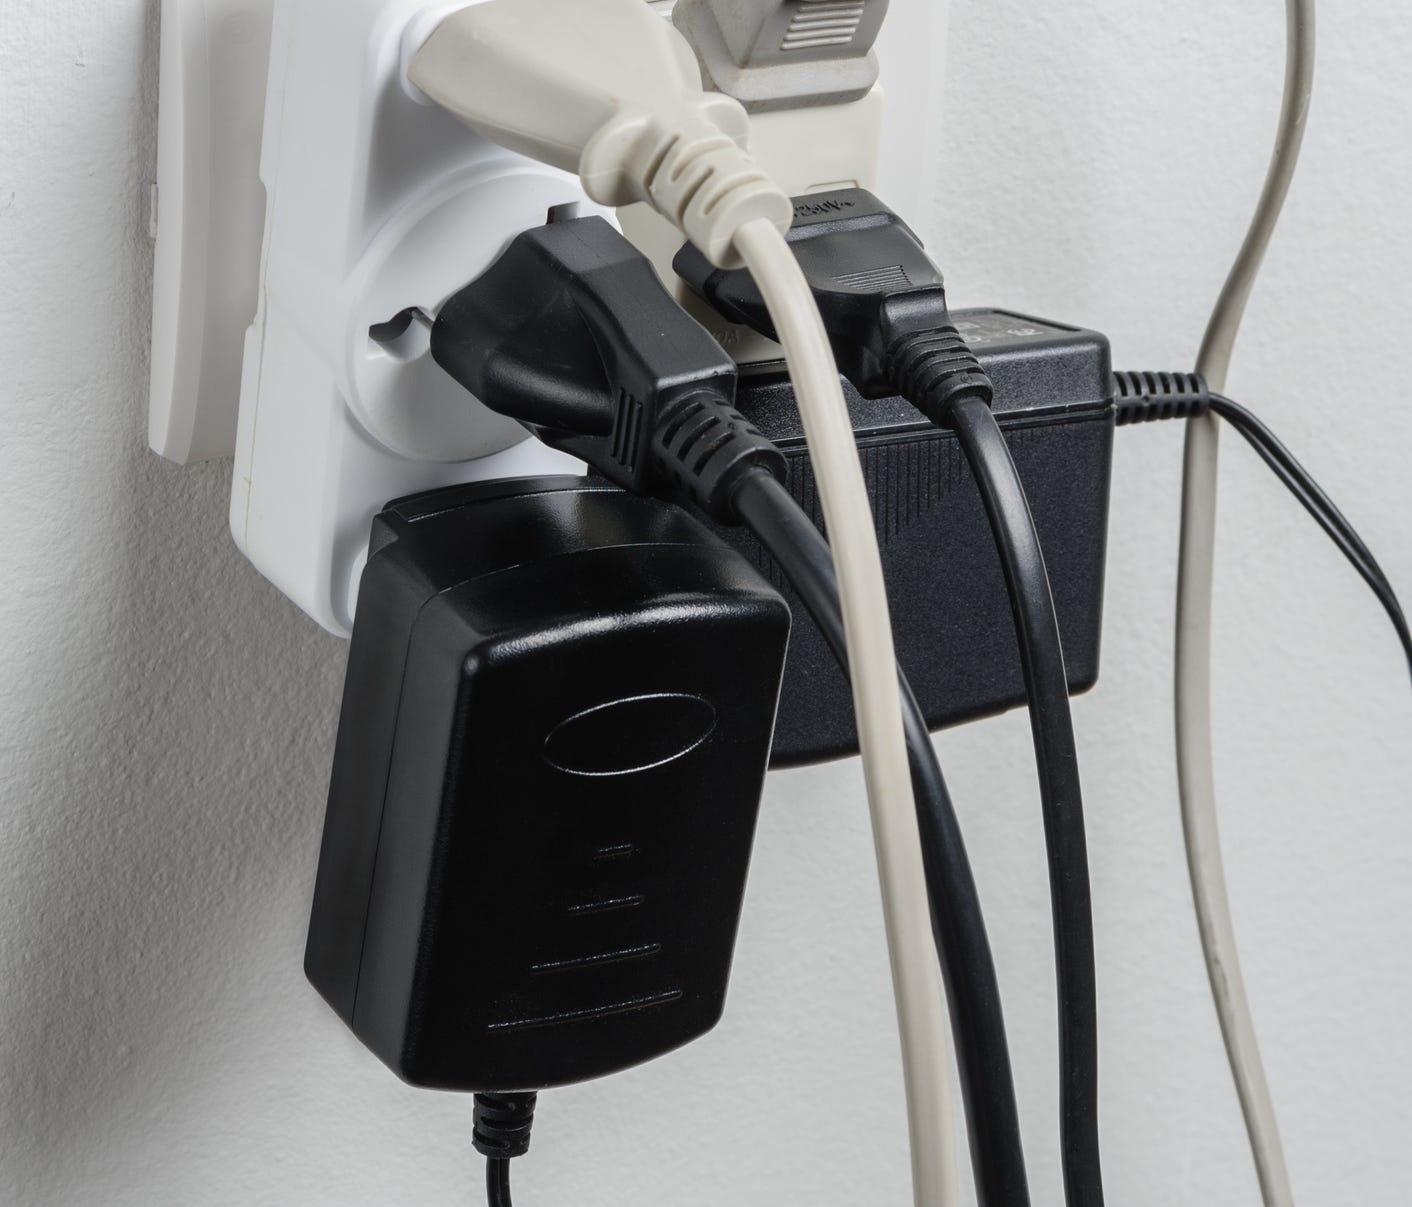 Too often, electric outlets are few and far between.